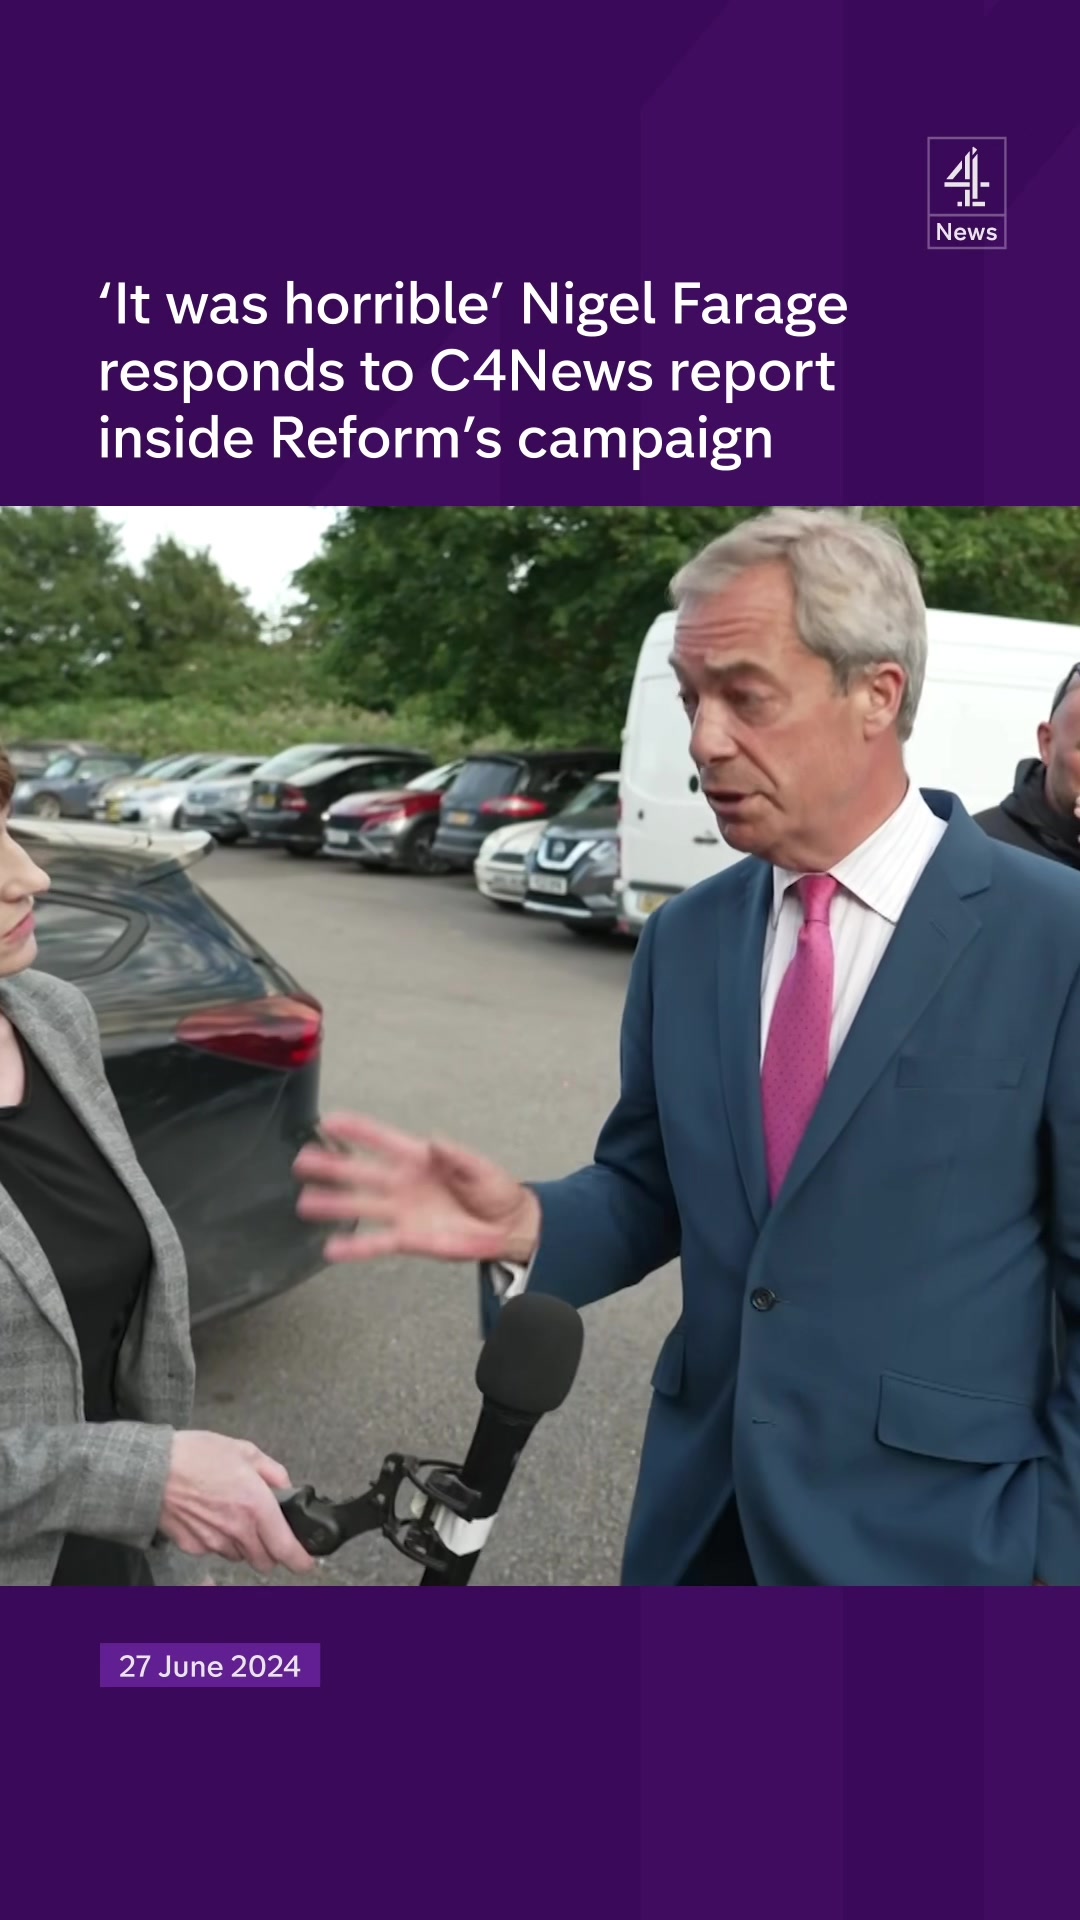 Nigel Farage responds to Channel 4 News undercover investigation within the Reform UK campaign in Clacton, exposing examples of racist language and raising questions whether the party has breached the local electoral campaign spending limit in the seat. #c4news #ReformUK #NigelFarage